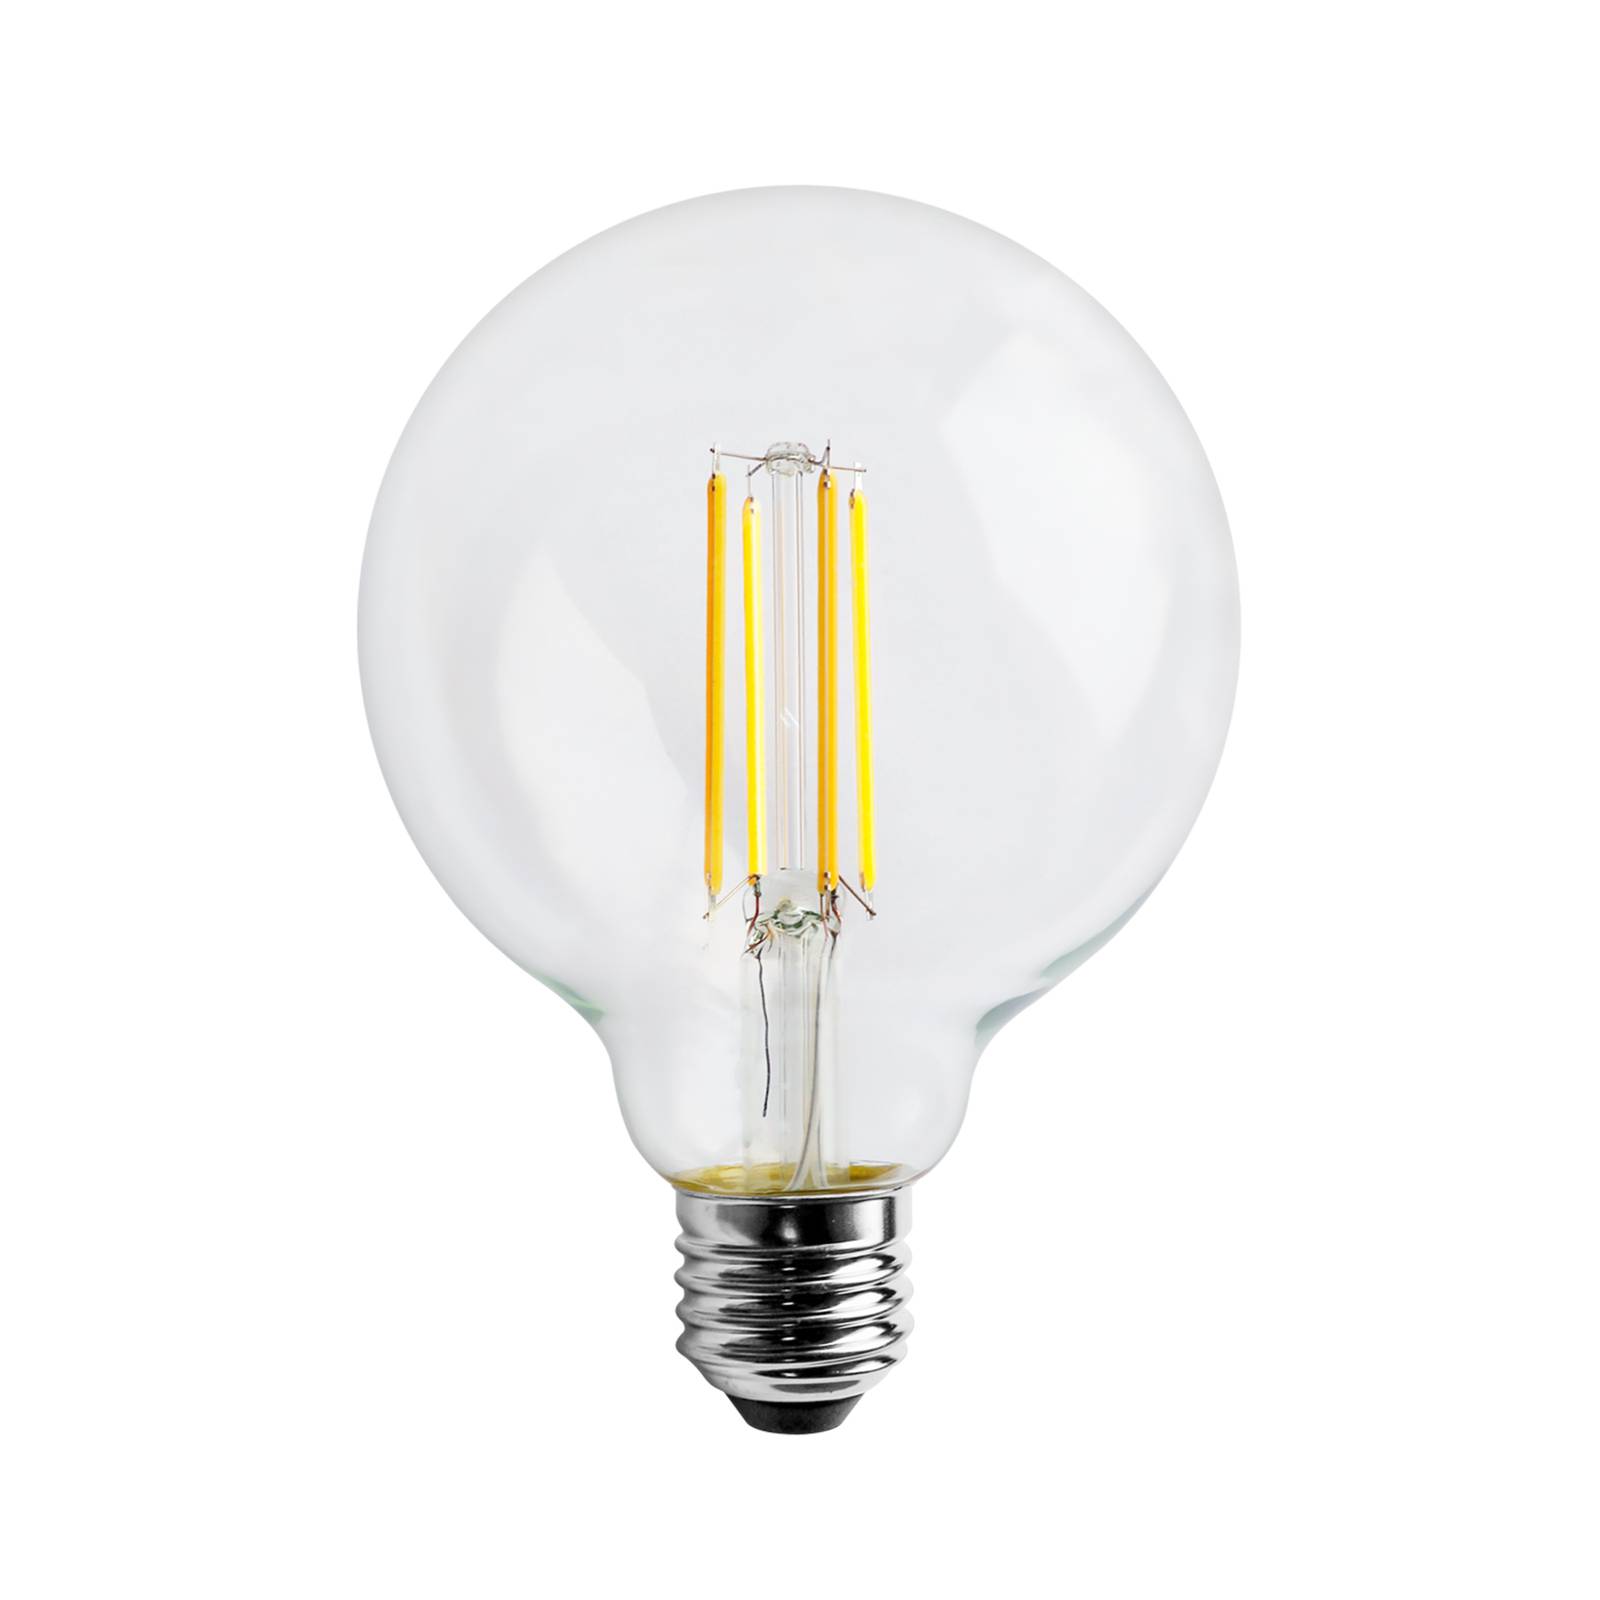 Image of Ampoule LED E27 4,5 W dimmable CCT Tuya Ø 9,5 cm 4251911747546